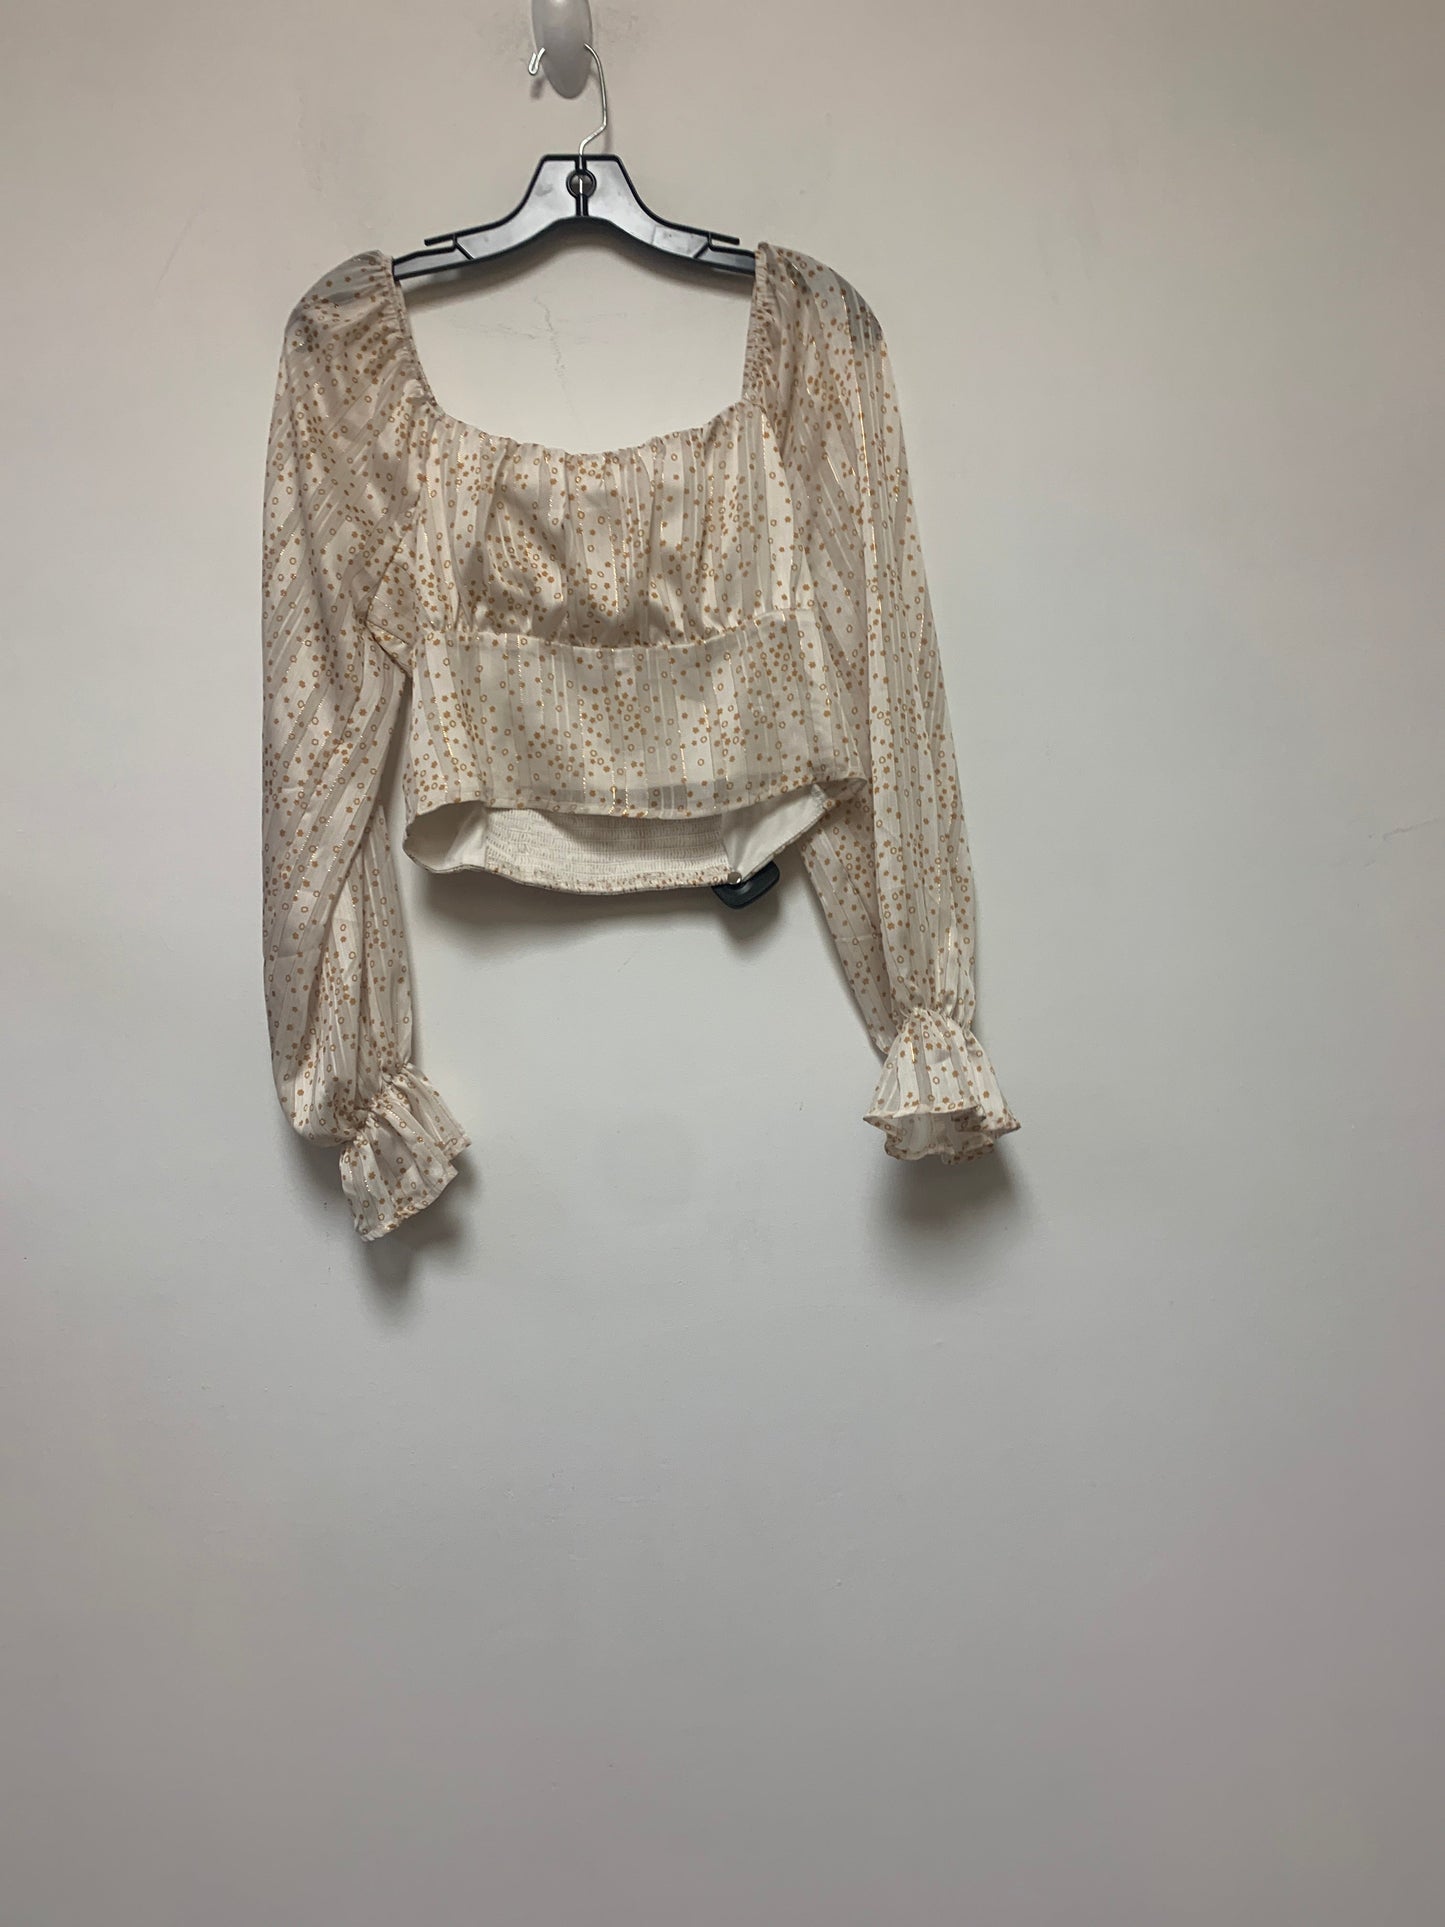 Top Long Sleeve By Miami  Size: L